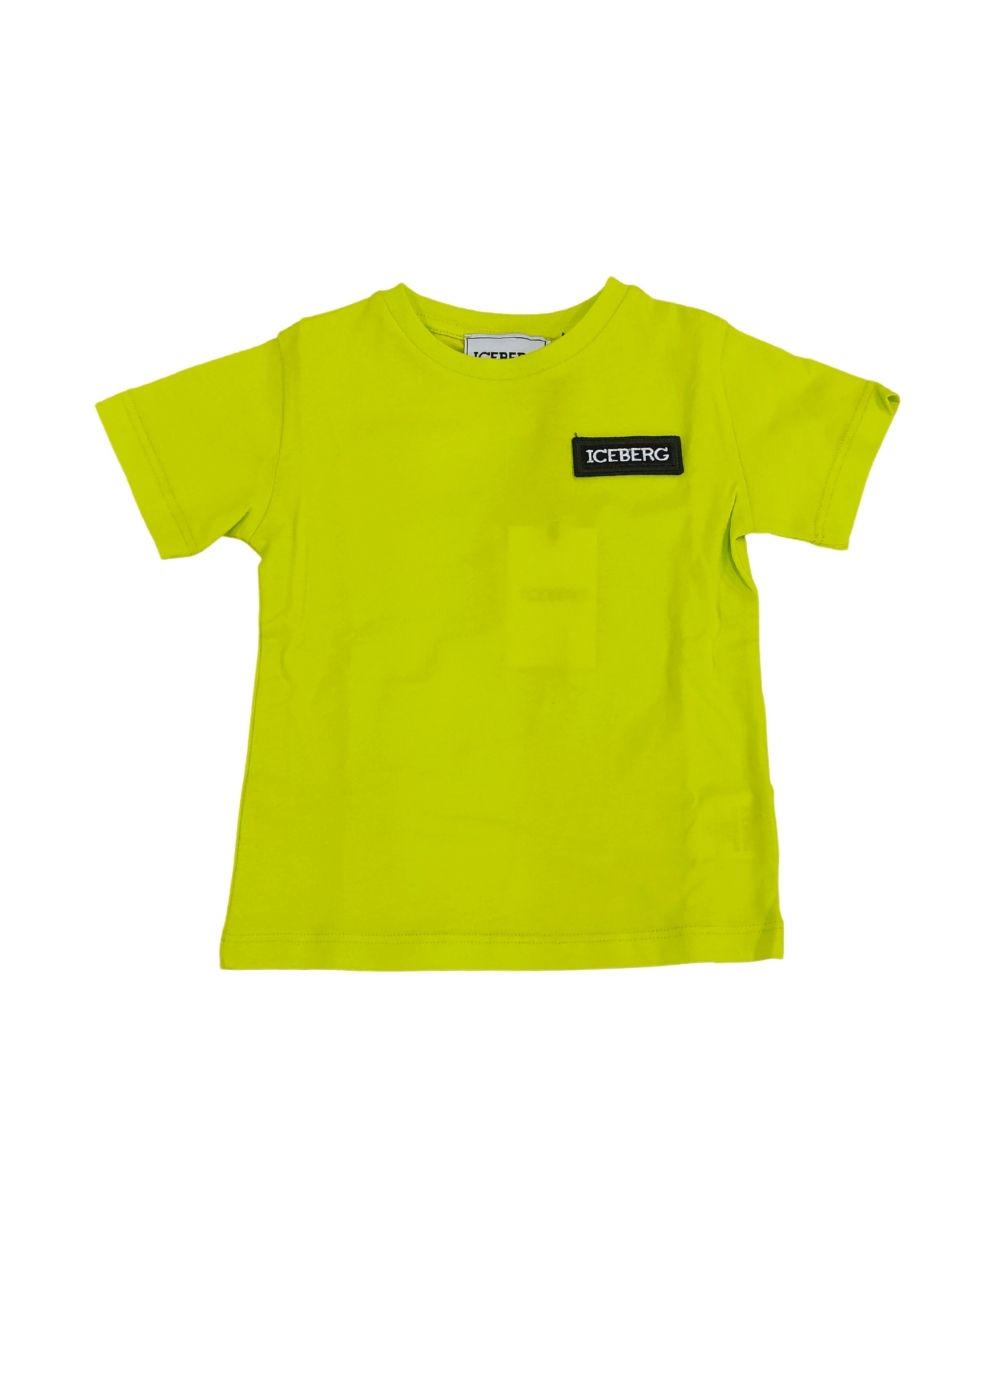 Featured image for “Iceberg T-shirt lime”